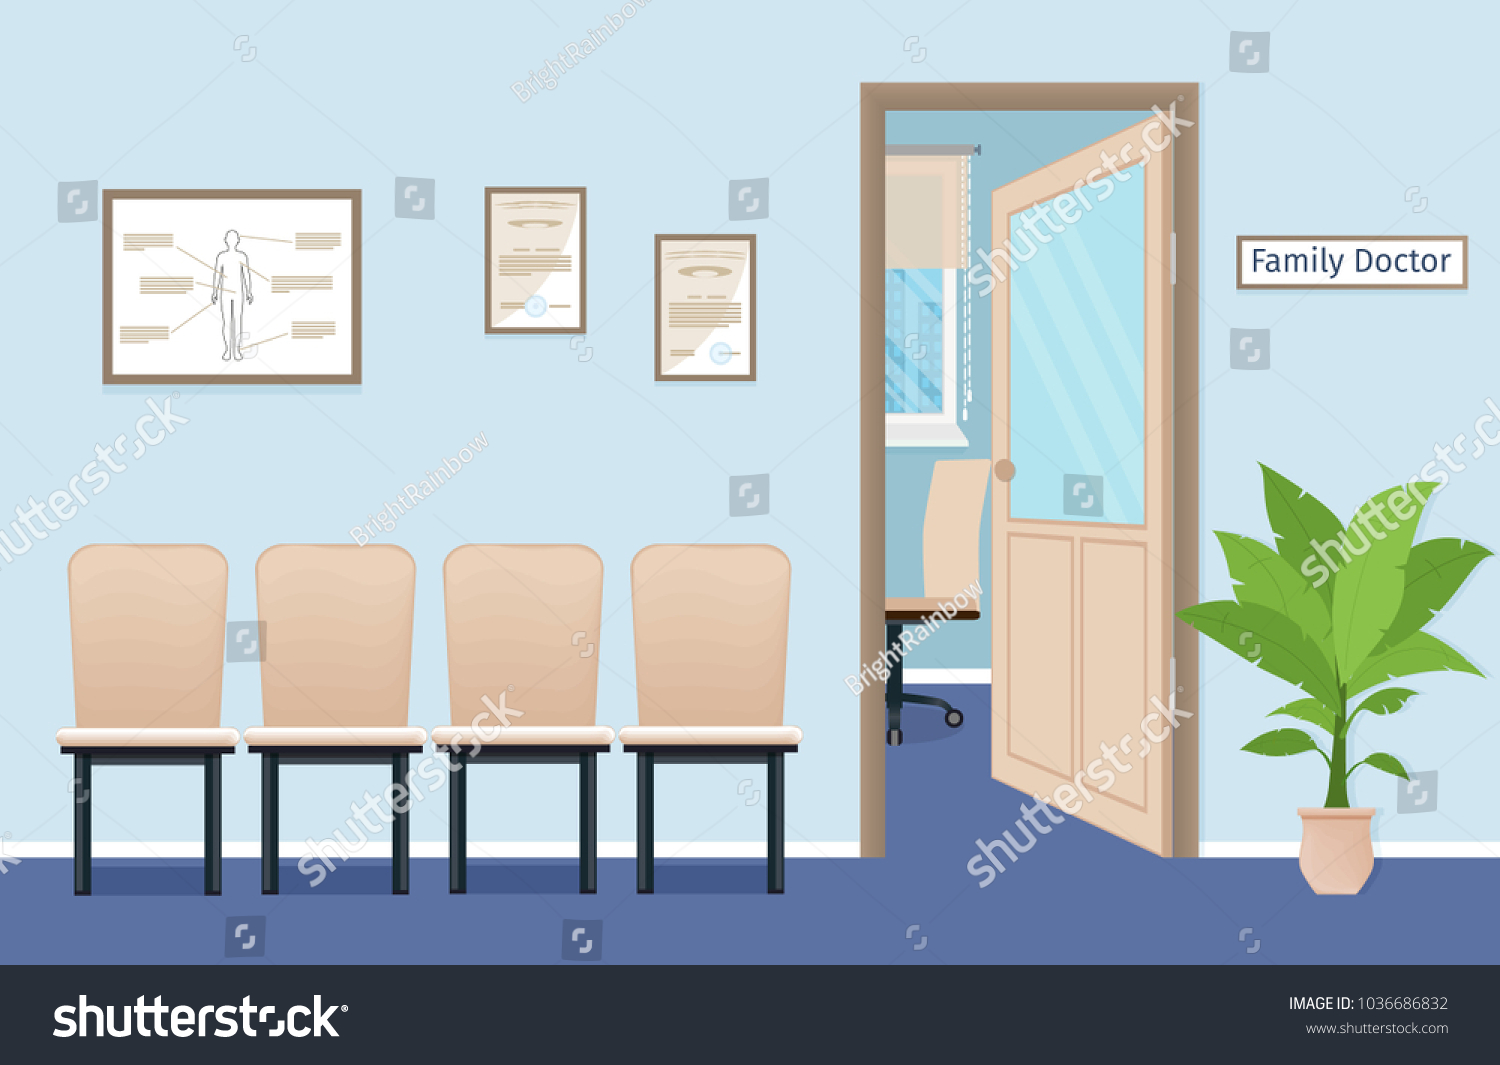 Family Doctors Consultation Office Private Medical Royalty